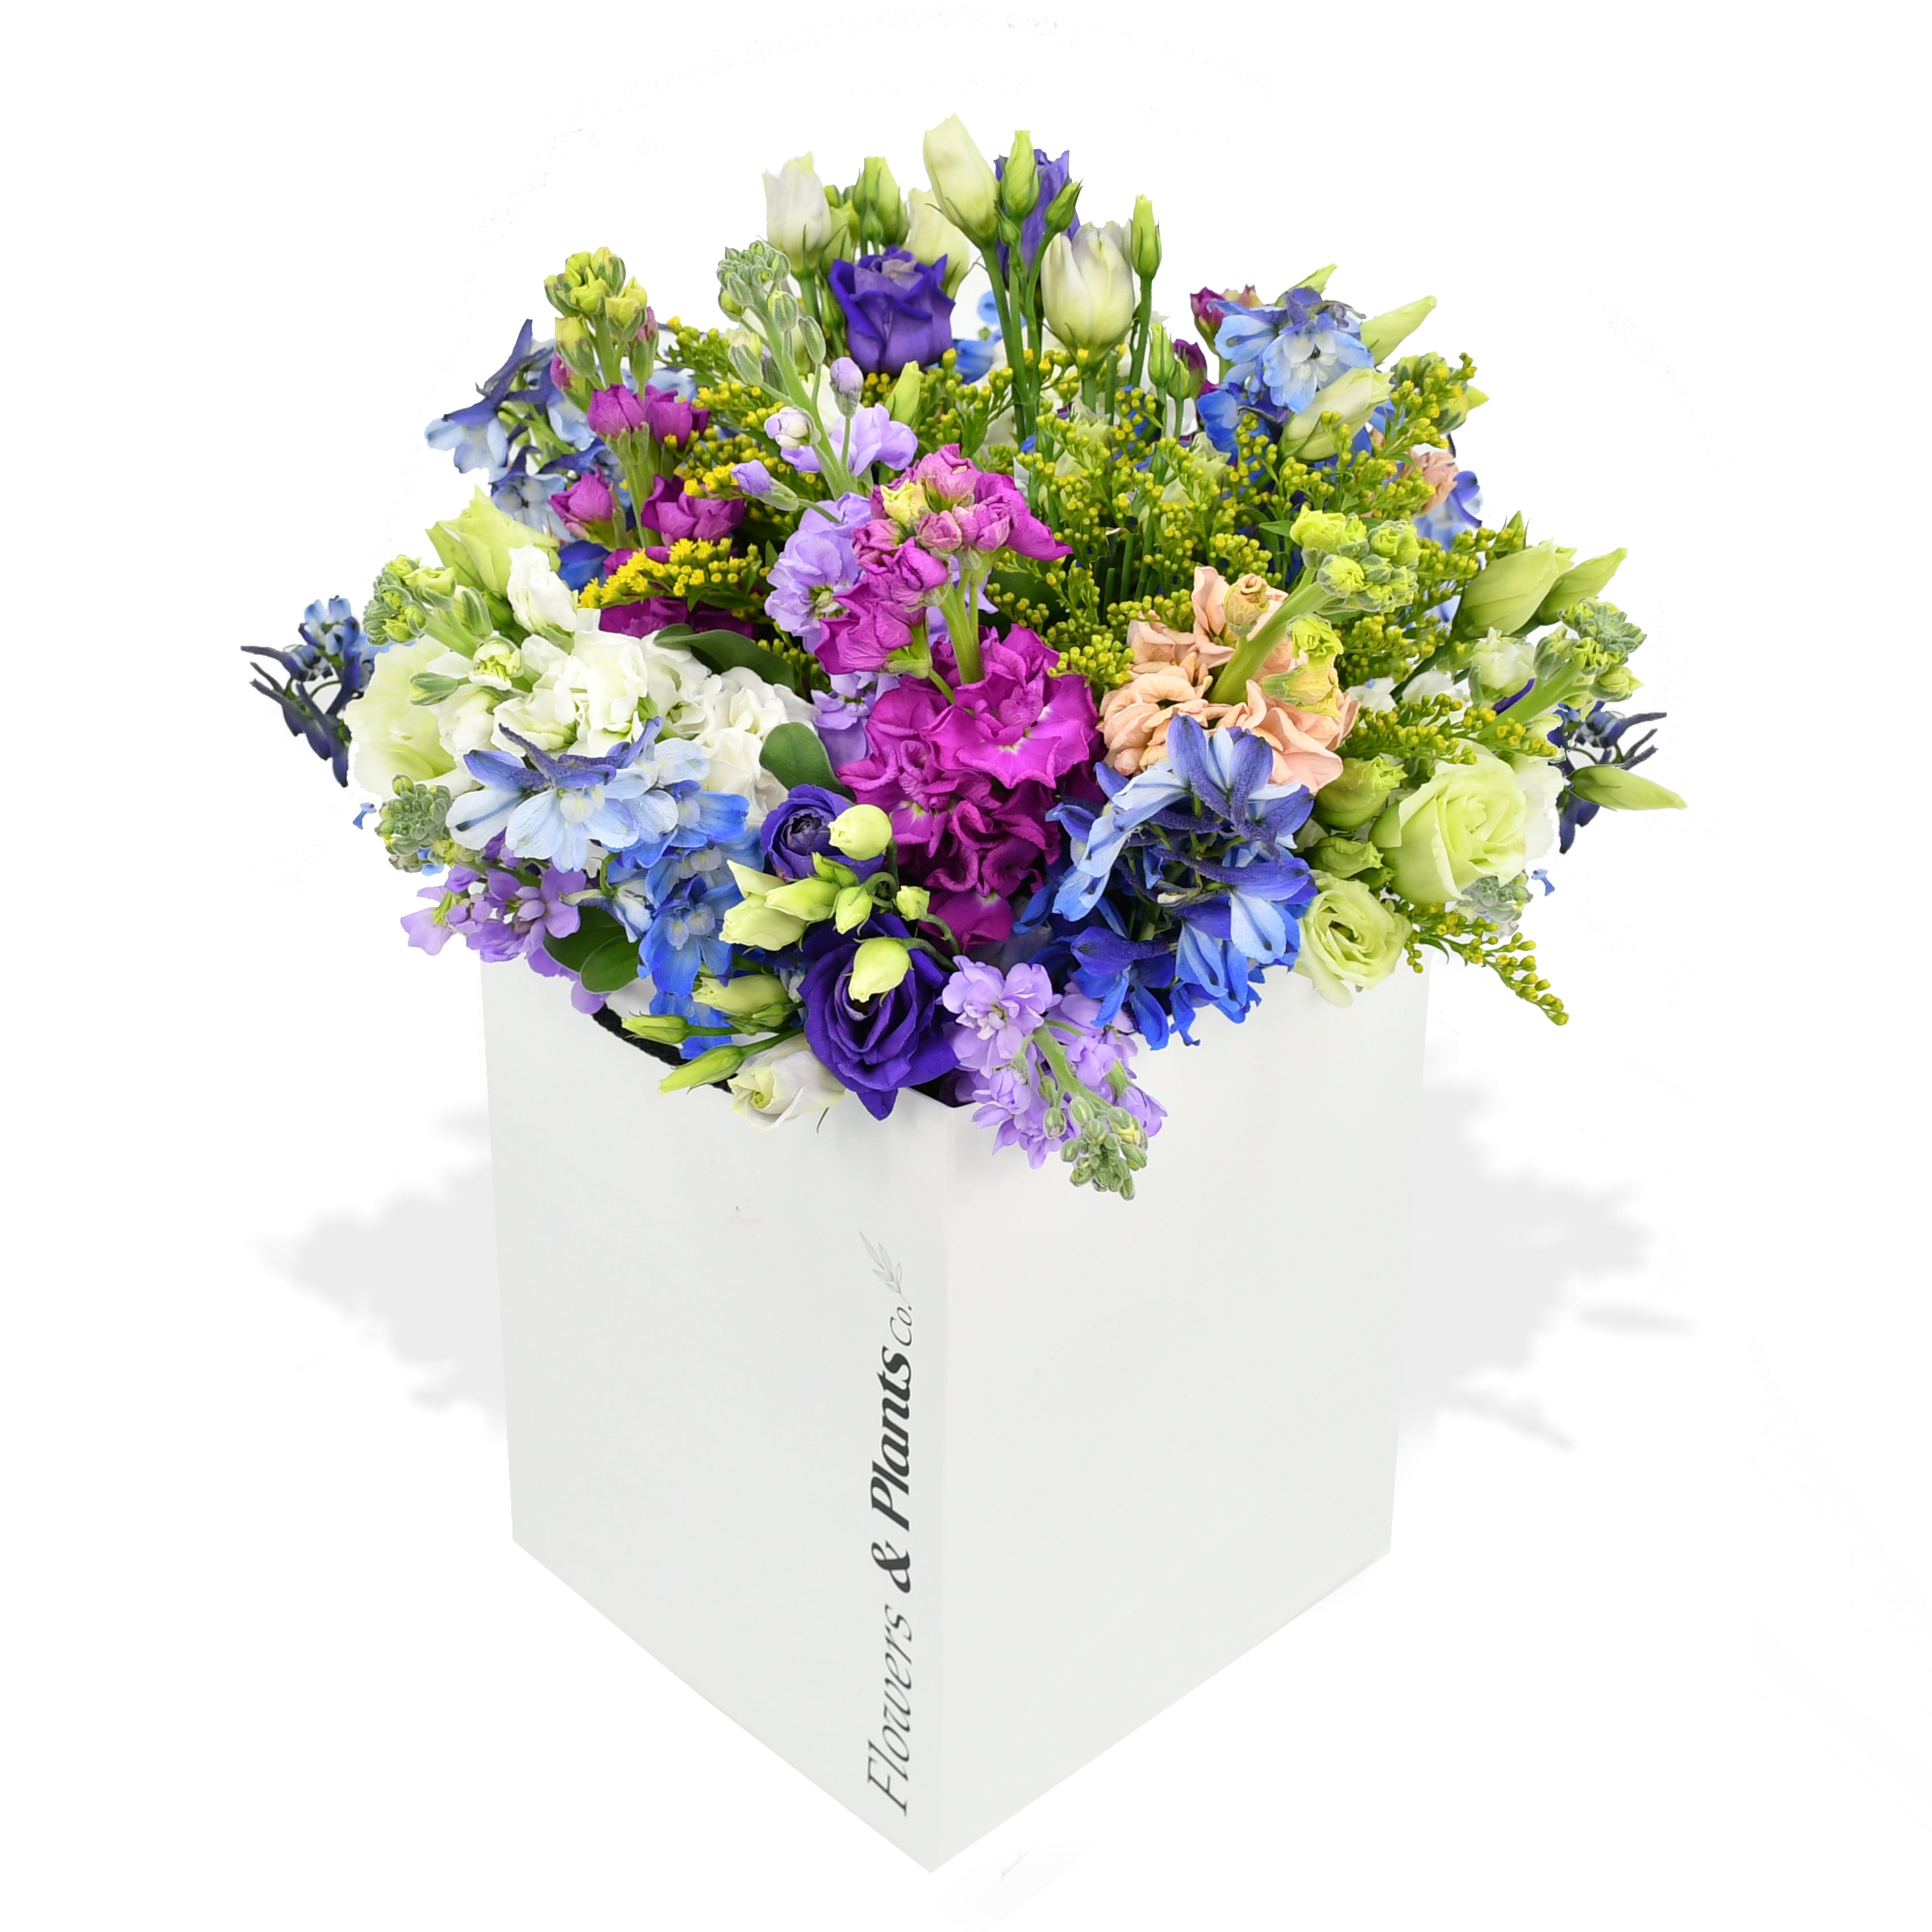 stocks and blue delphinium in a gift bag